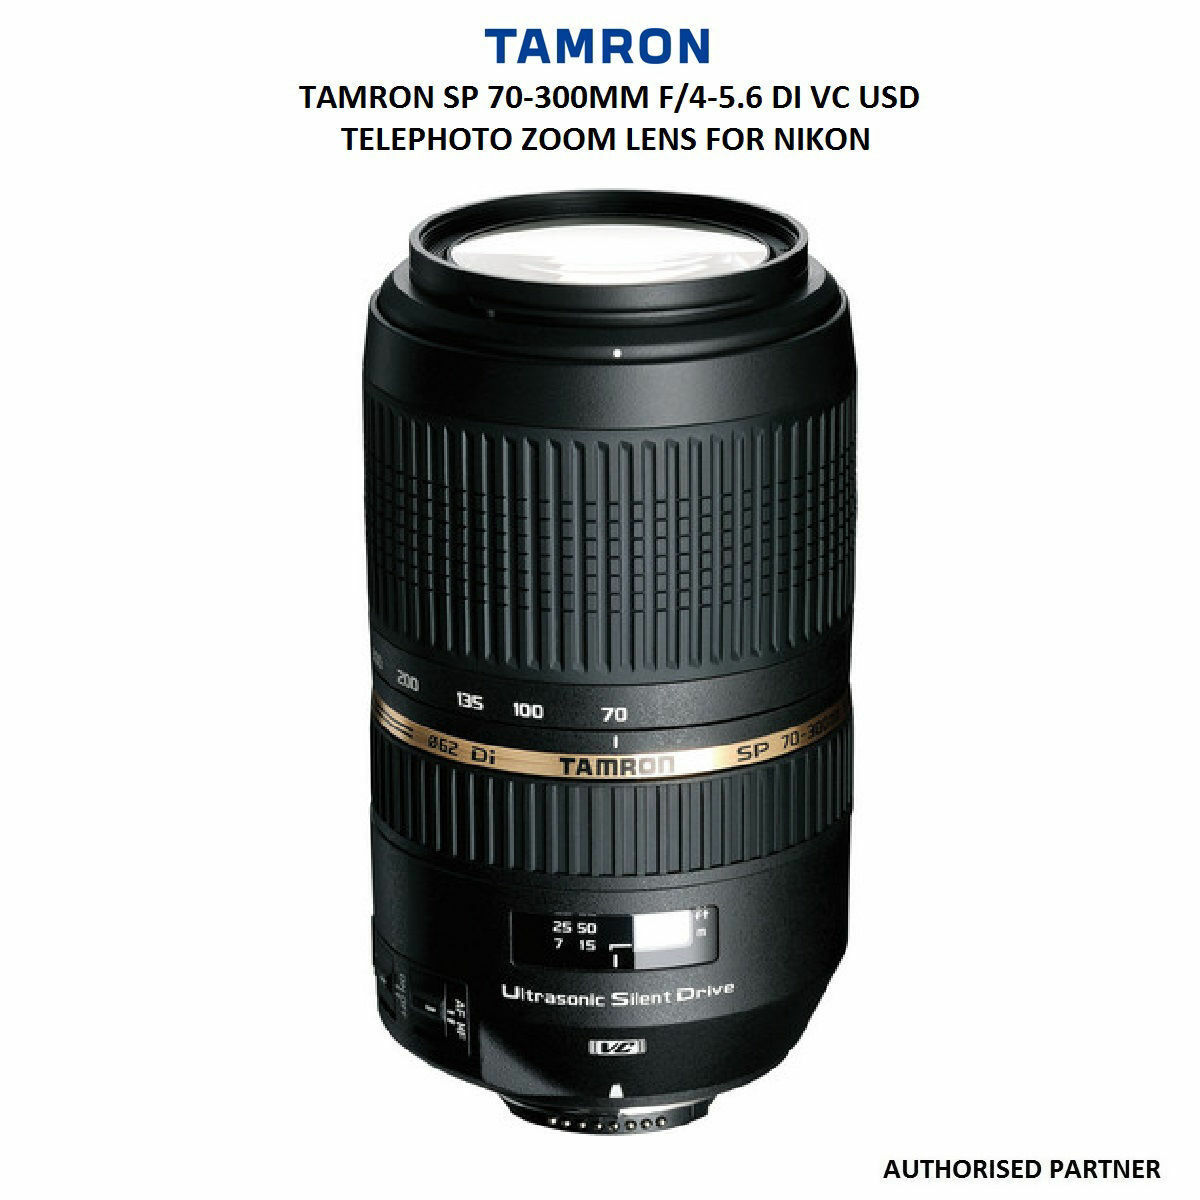 TAMRON ニコンSP 70-300mm F 4-5.6 Di VC USD - レンズ(ズーム)